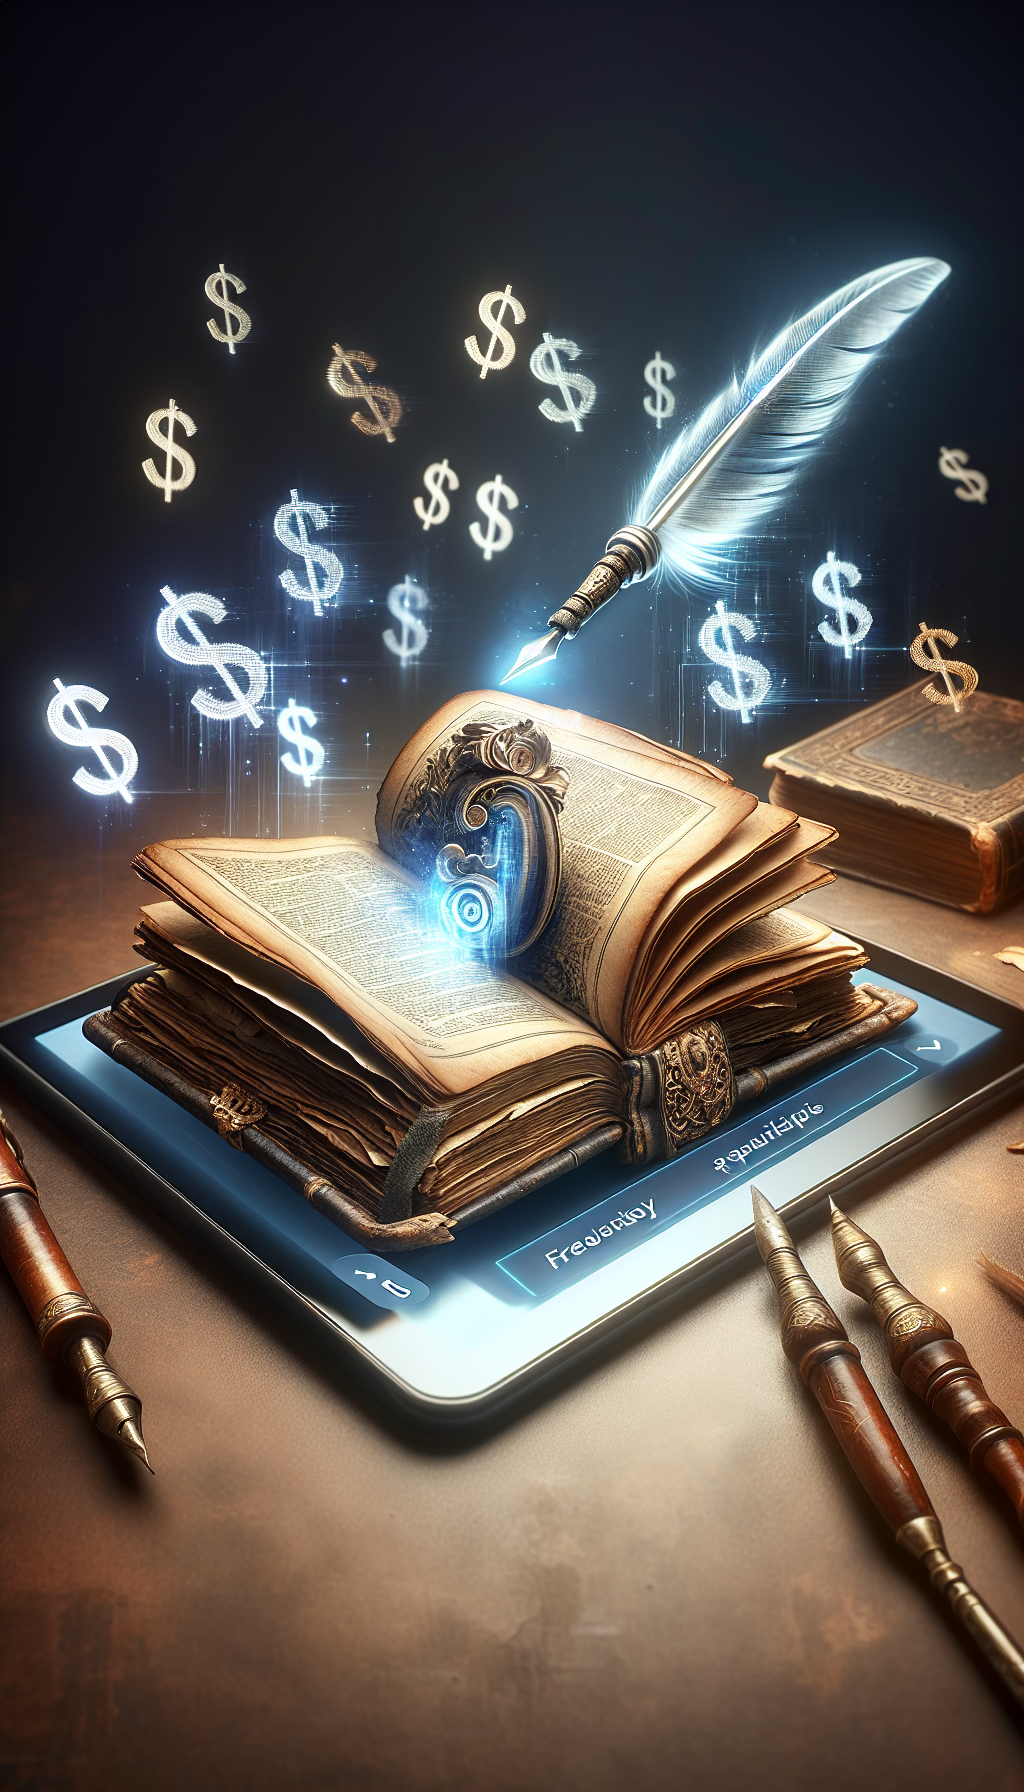 An antique book rests open atop a luminous digital tablet displaying a magnifying glass and dollar signs, symbolizing online appraisal tools. Gently turning pages morph into digital pixels leading to a website interface, while a classic quill pen writes unseen values in the air, merging the charm of antiquity with modern-day technology's free valuing service.